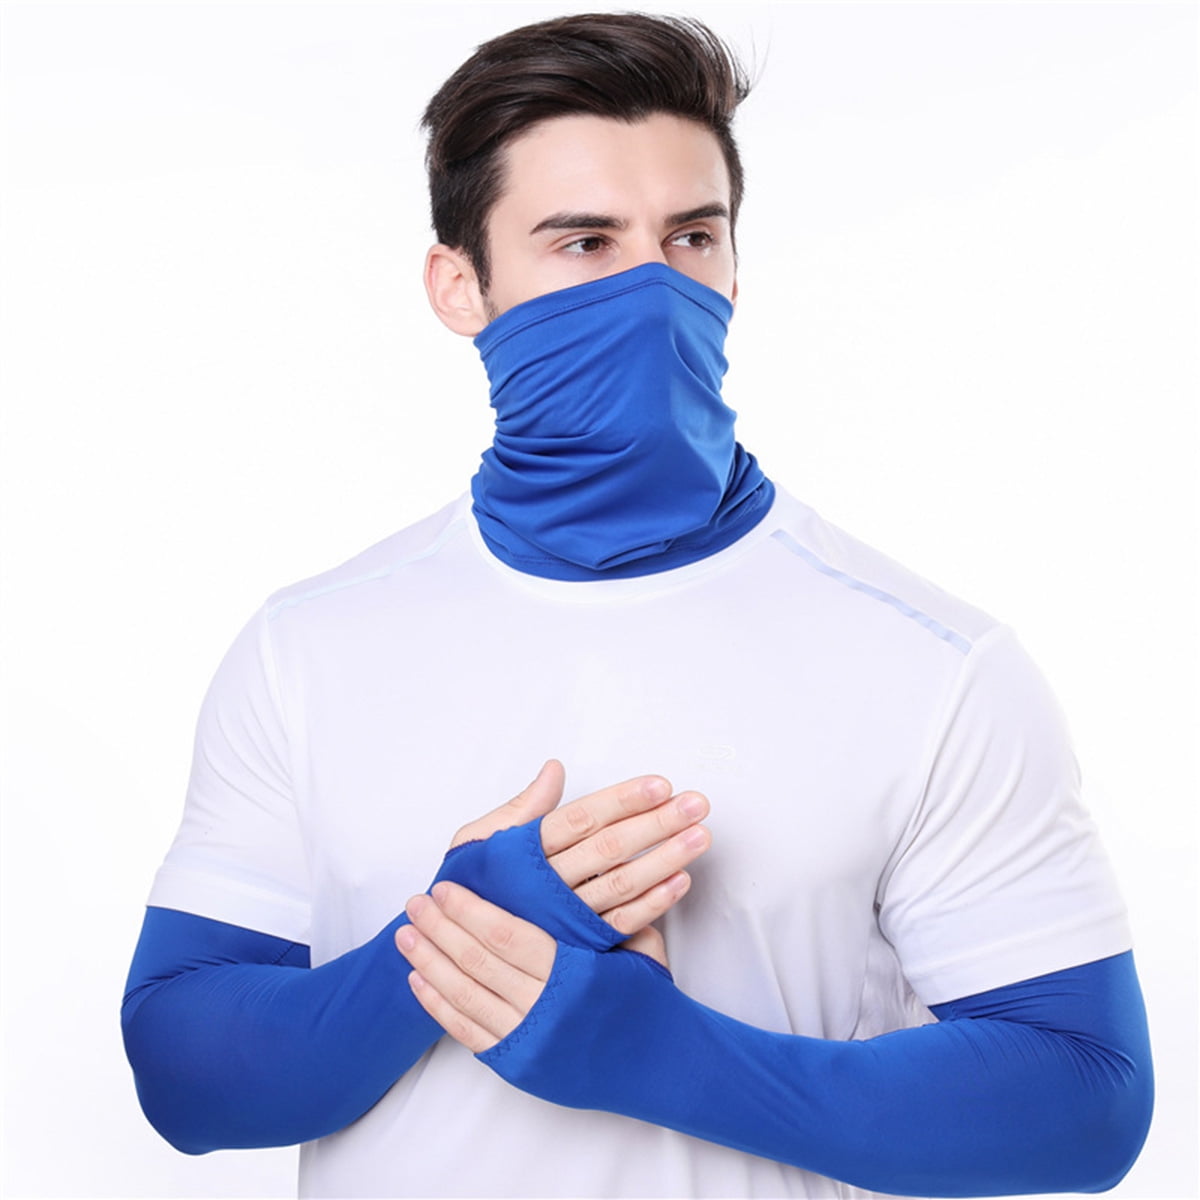 Details about   Face Guard Neck Gaiter Sun Cover Skull Hair Head Band-Stay Back 